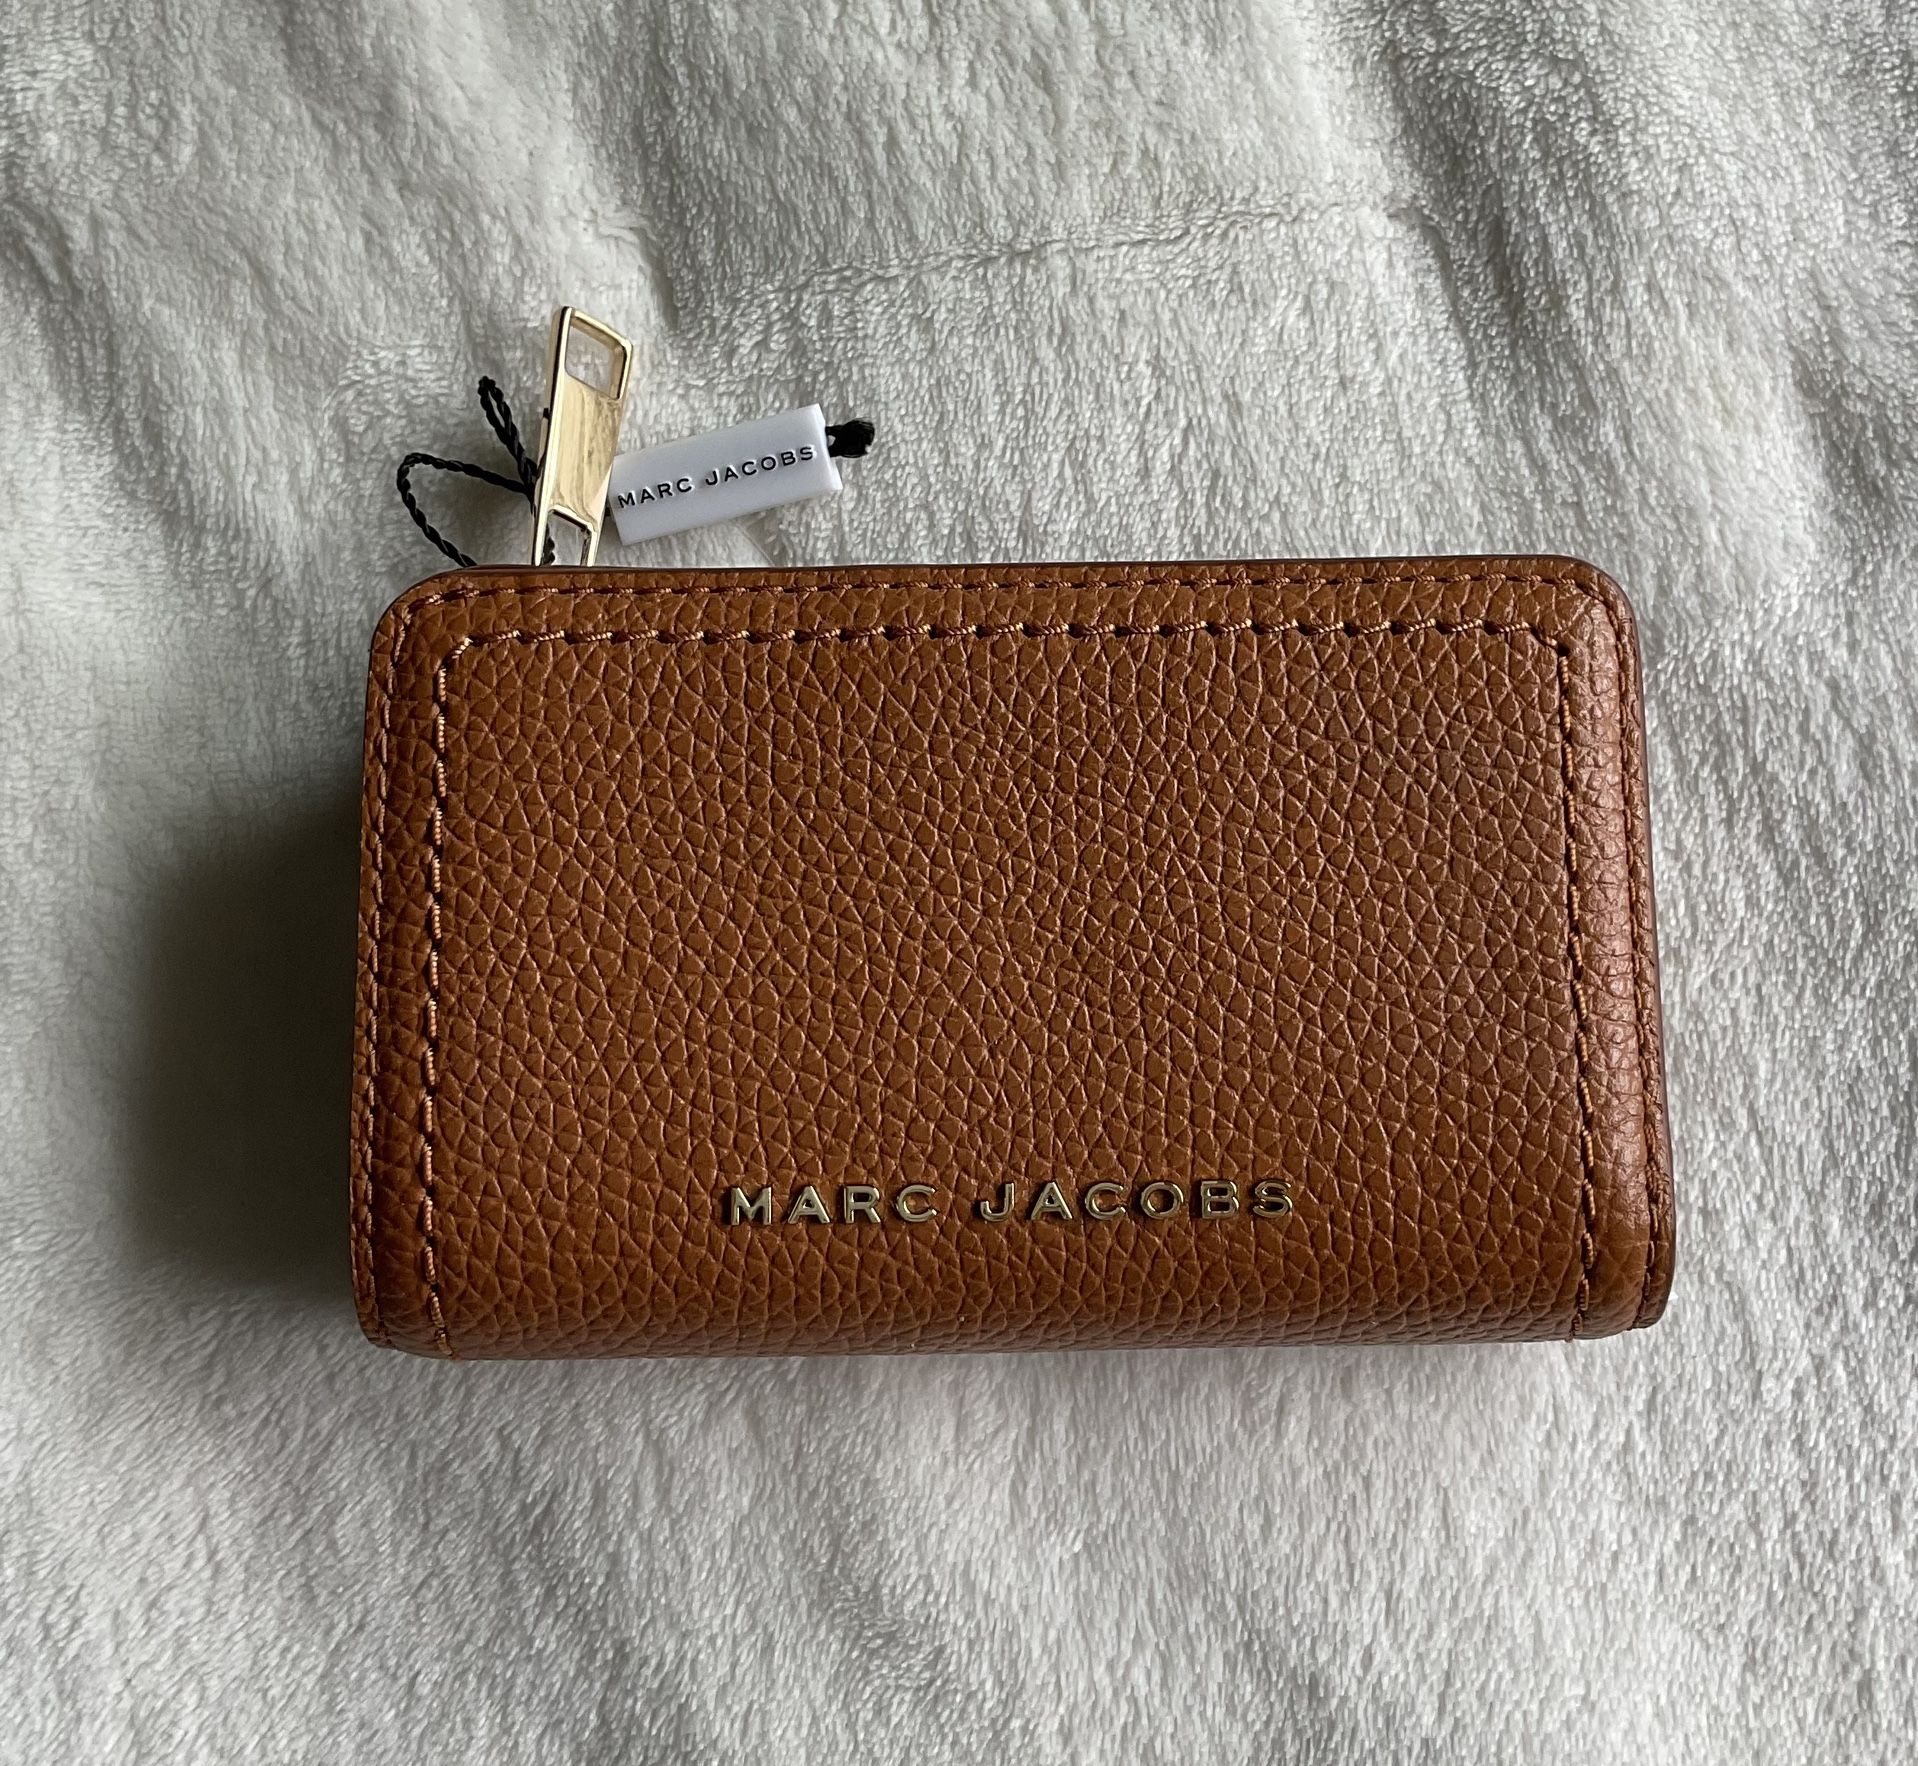 NEW Marc Jacobs Leather Topstitched Compact Zip Wallet Smoked Almond